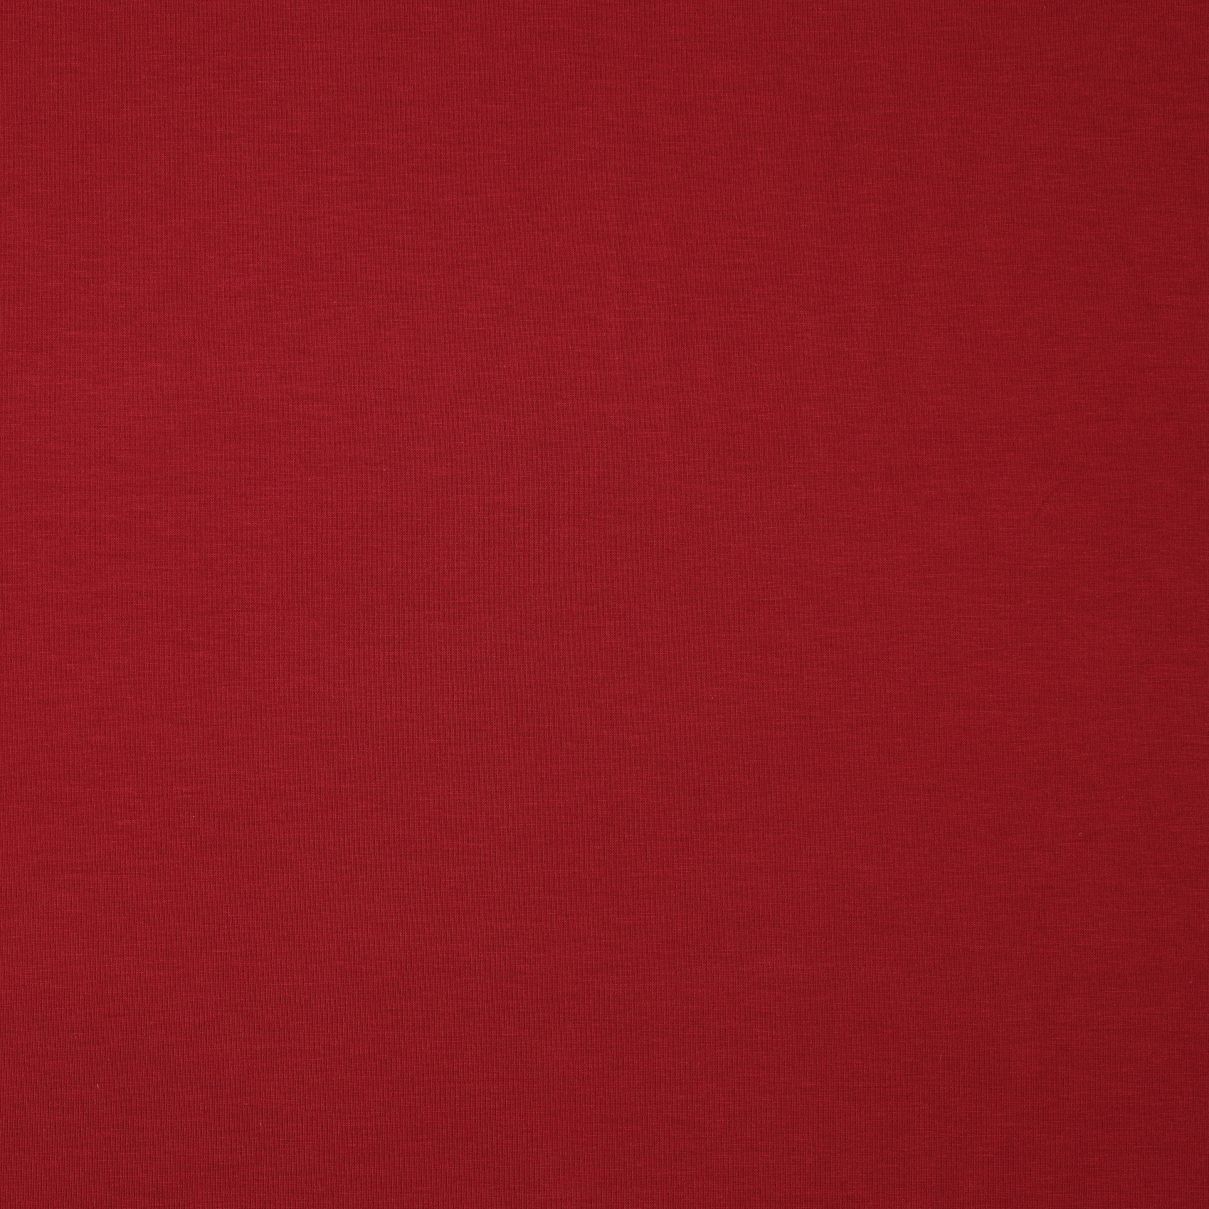 Allure Solid Red Soft Single Knit Fabric